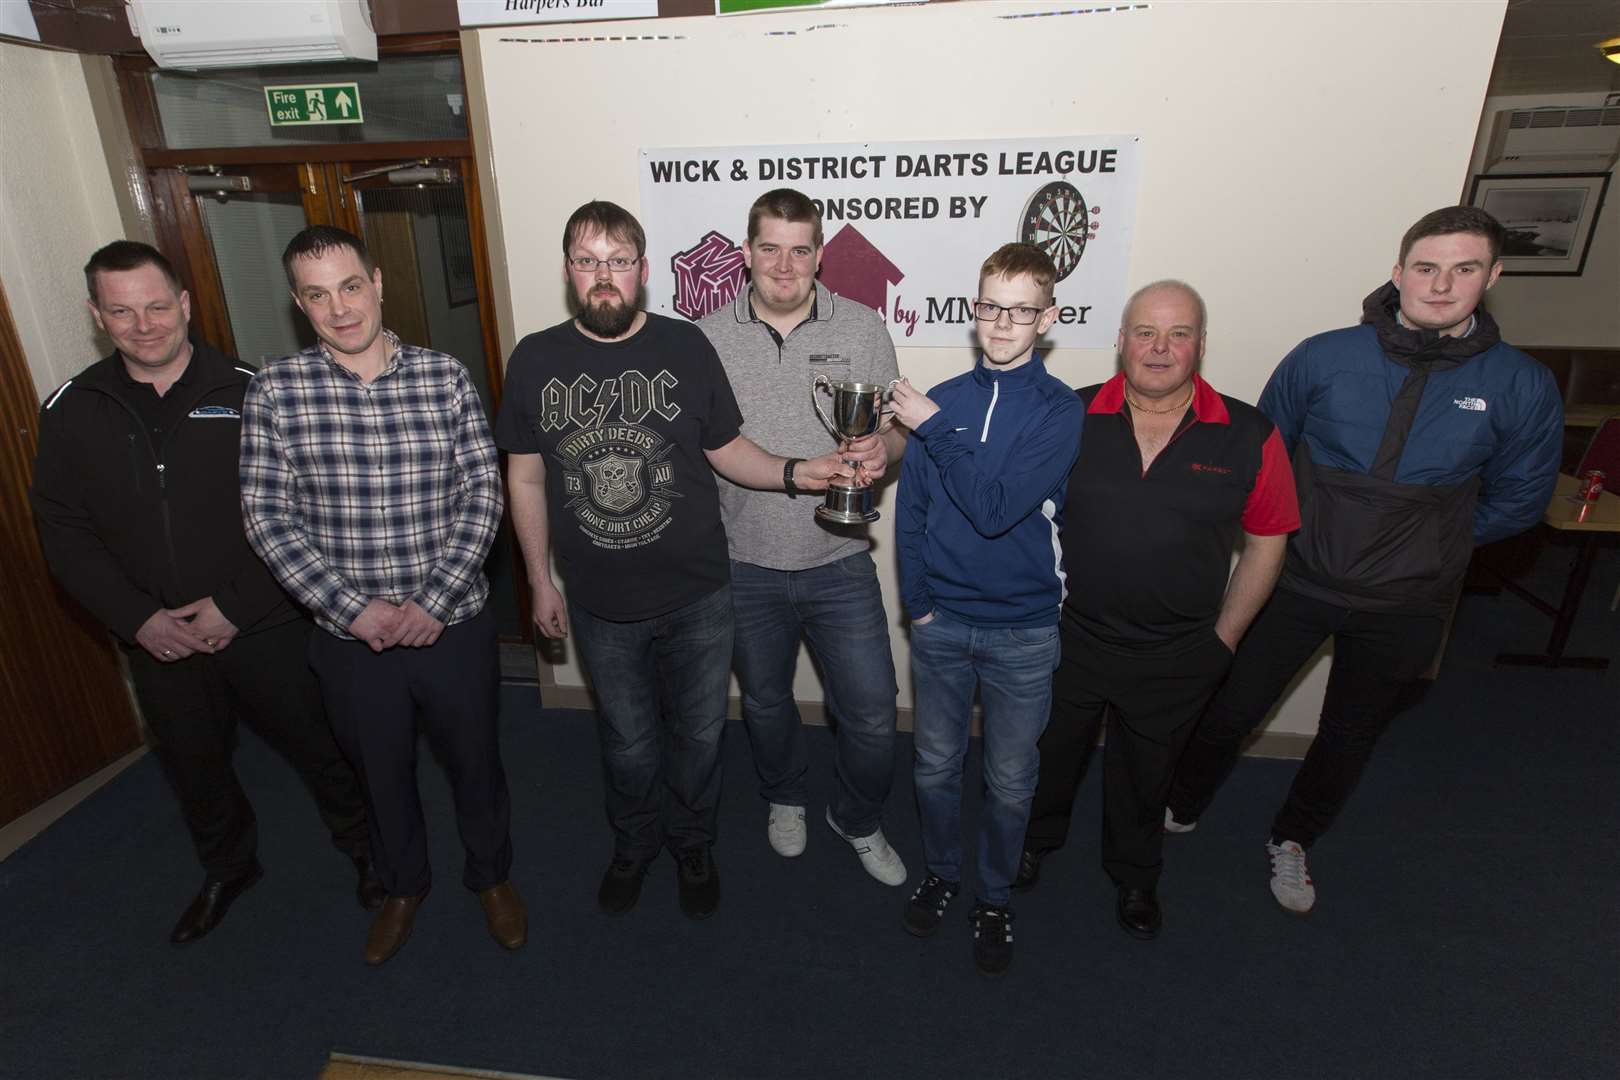 The Ray Sinclair Memorial Cup men's competition was won by Wick and District Darts League second division players Chris Scott and Eean Ronaldson (Sinclair Bay), who defeated the first division pair of Ronnie Plowman and Damon Meikle (Seaforth). Ray's grandson, Craig, is pictured handing the trophy to Eean (centre) and Chris (centre left), while looking on are losing finalists Ronnie (second right) and Damon (right), along with Ray's sons Gary (left) and Graeme. The competition was held in Harper's Bar on Tuesday night. Picture: Robert MacDonald / Northern Studios